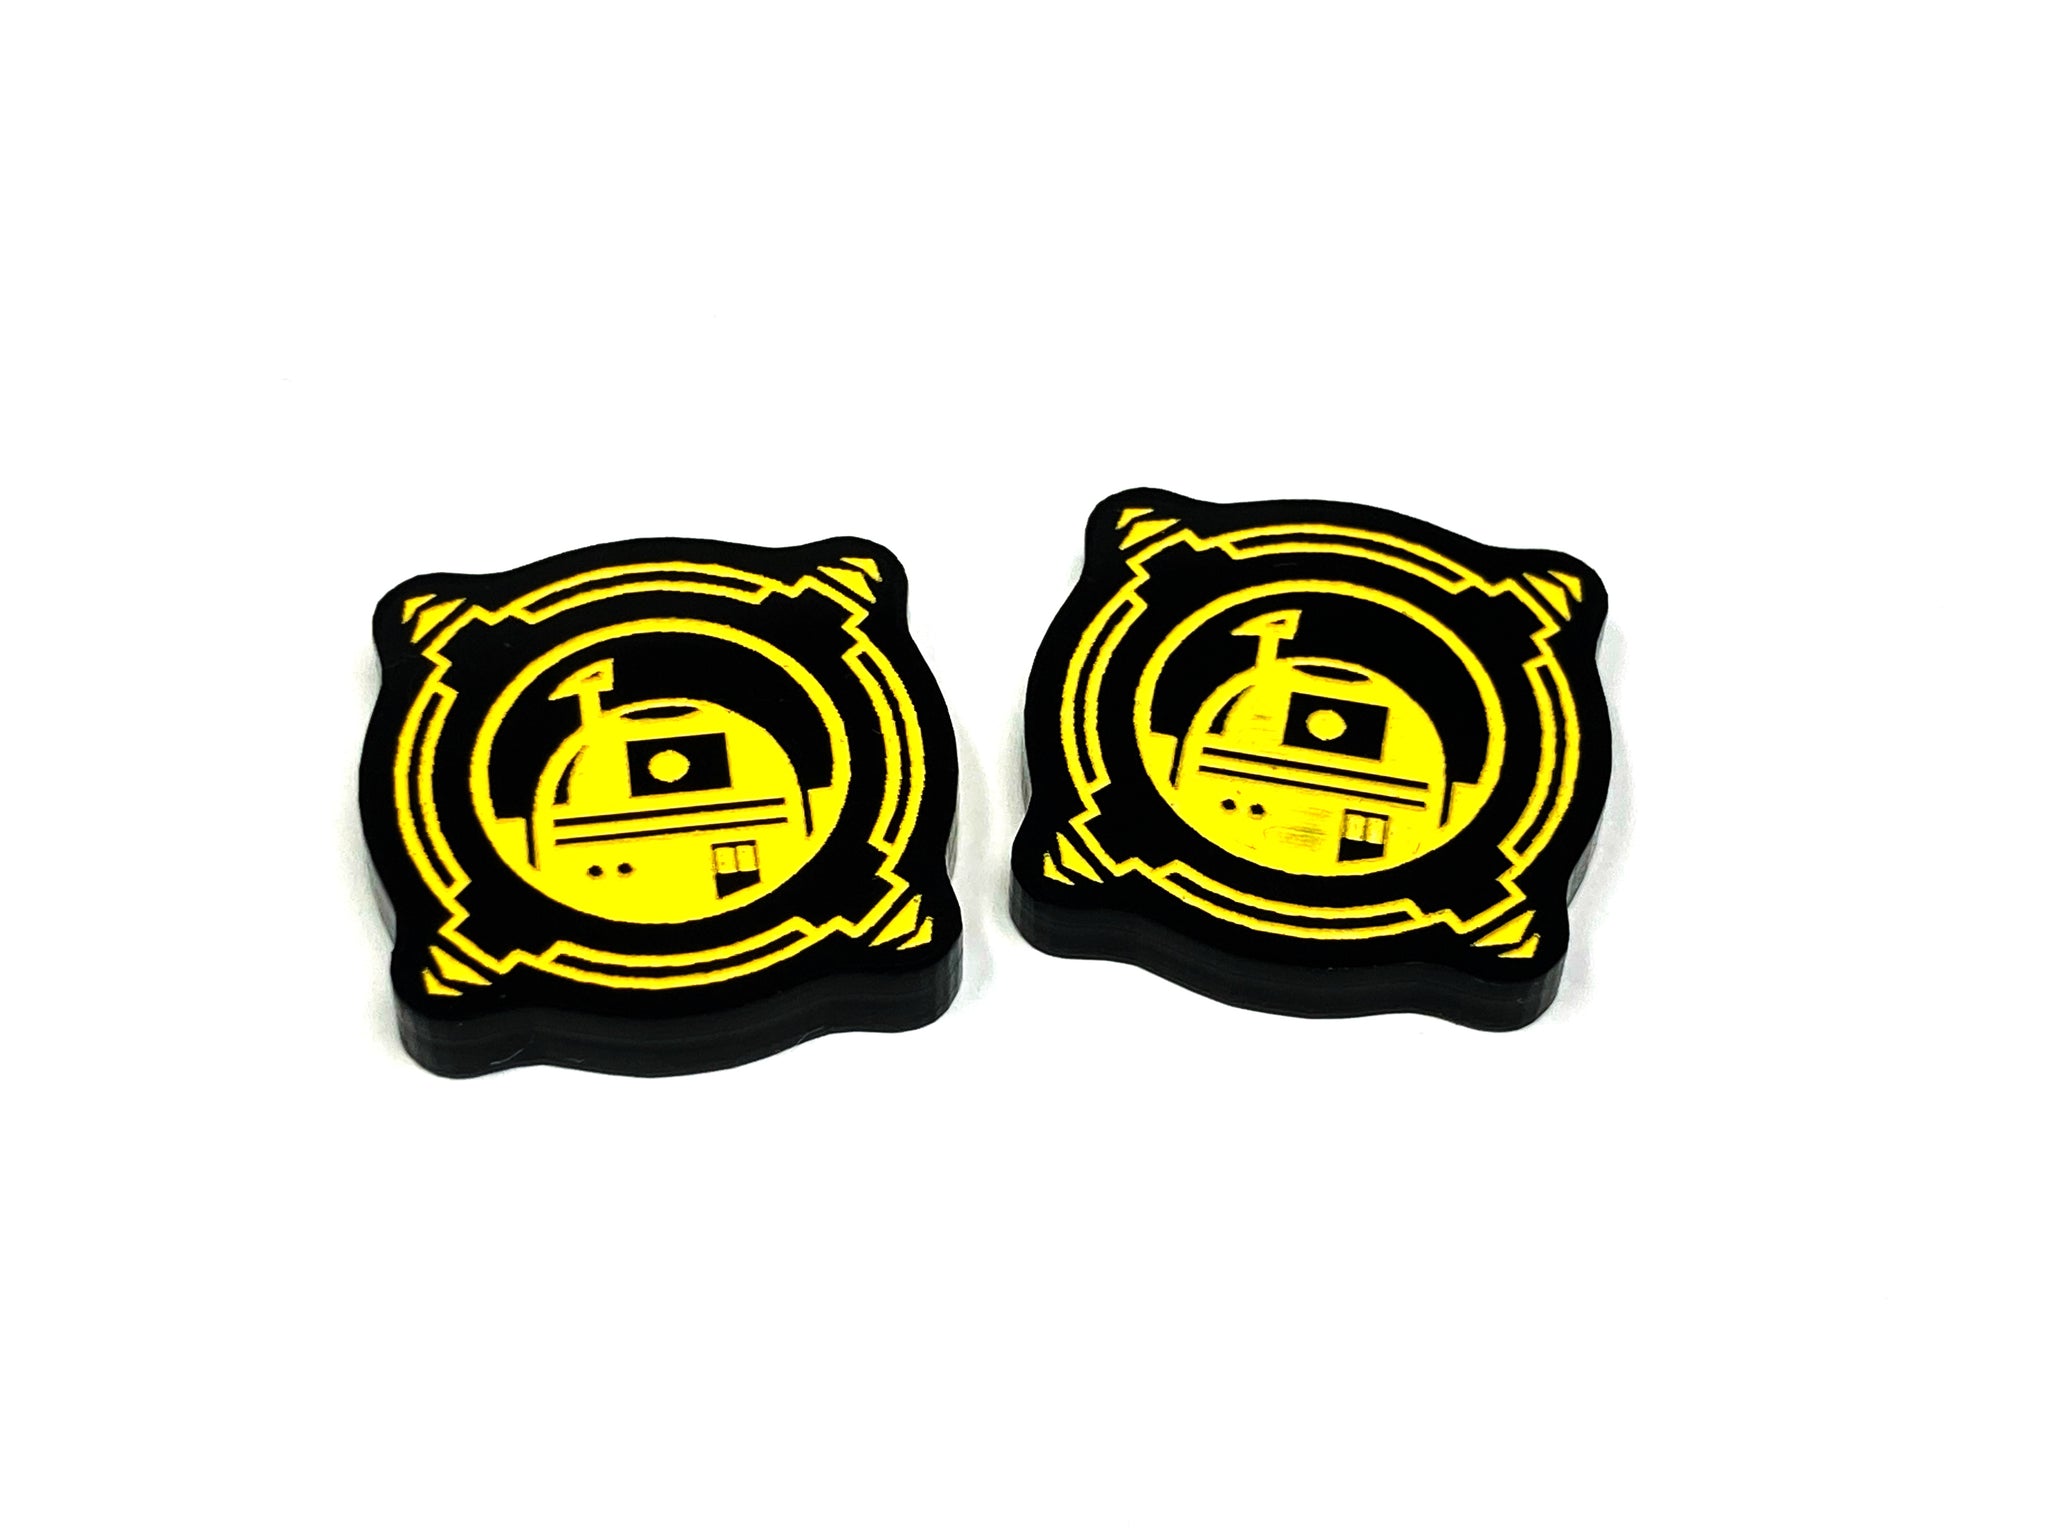 2 x Astromech Charge Tokens - Black Series (Double Sided)